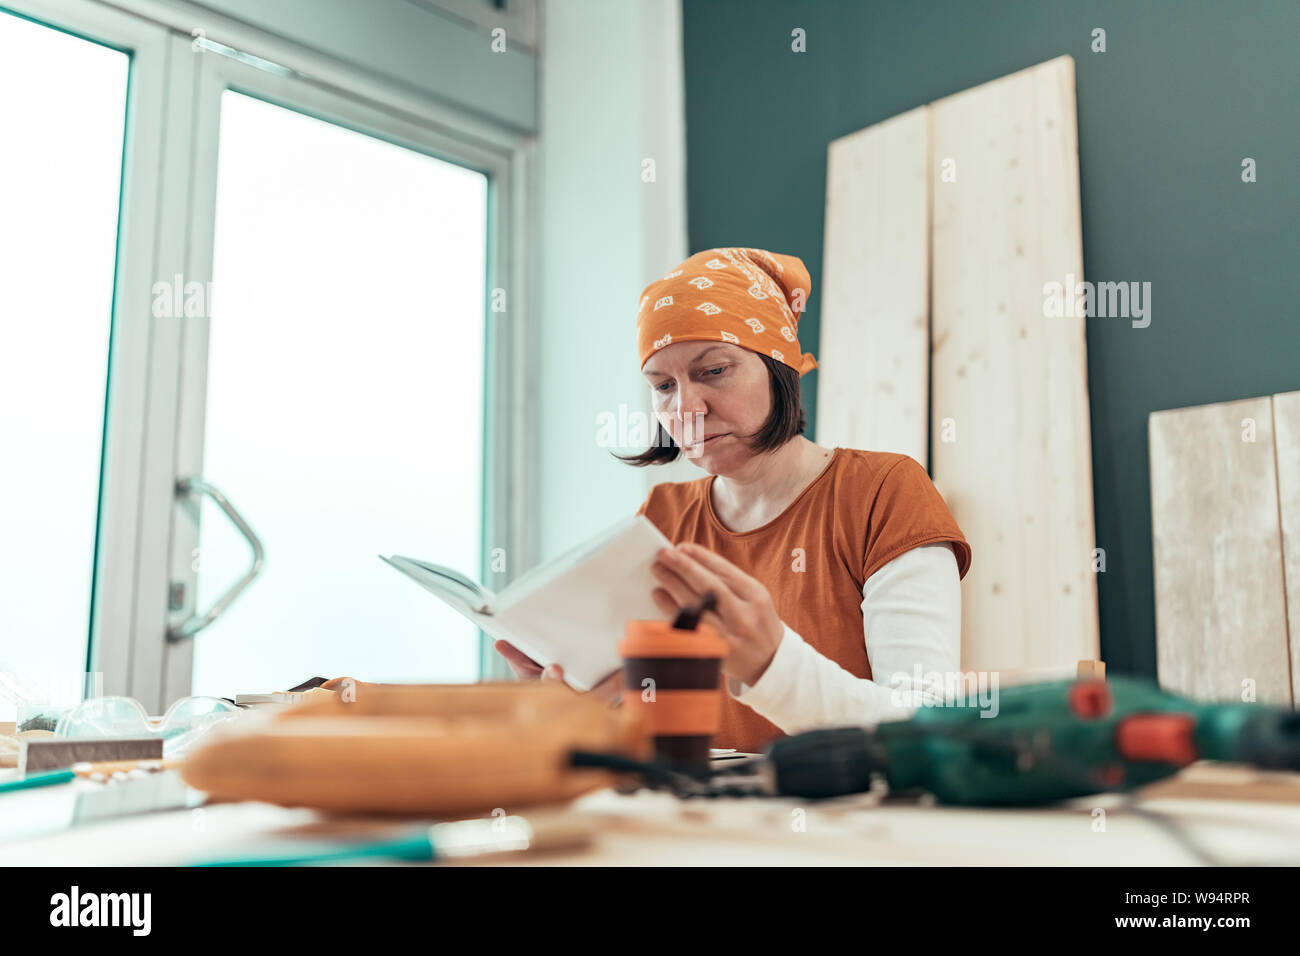 Female carpenter reading DIY project instruction manual in small business woodwork workshop Stock Photo